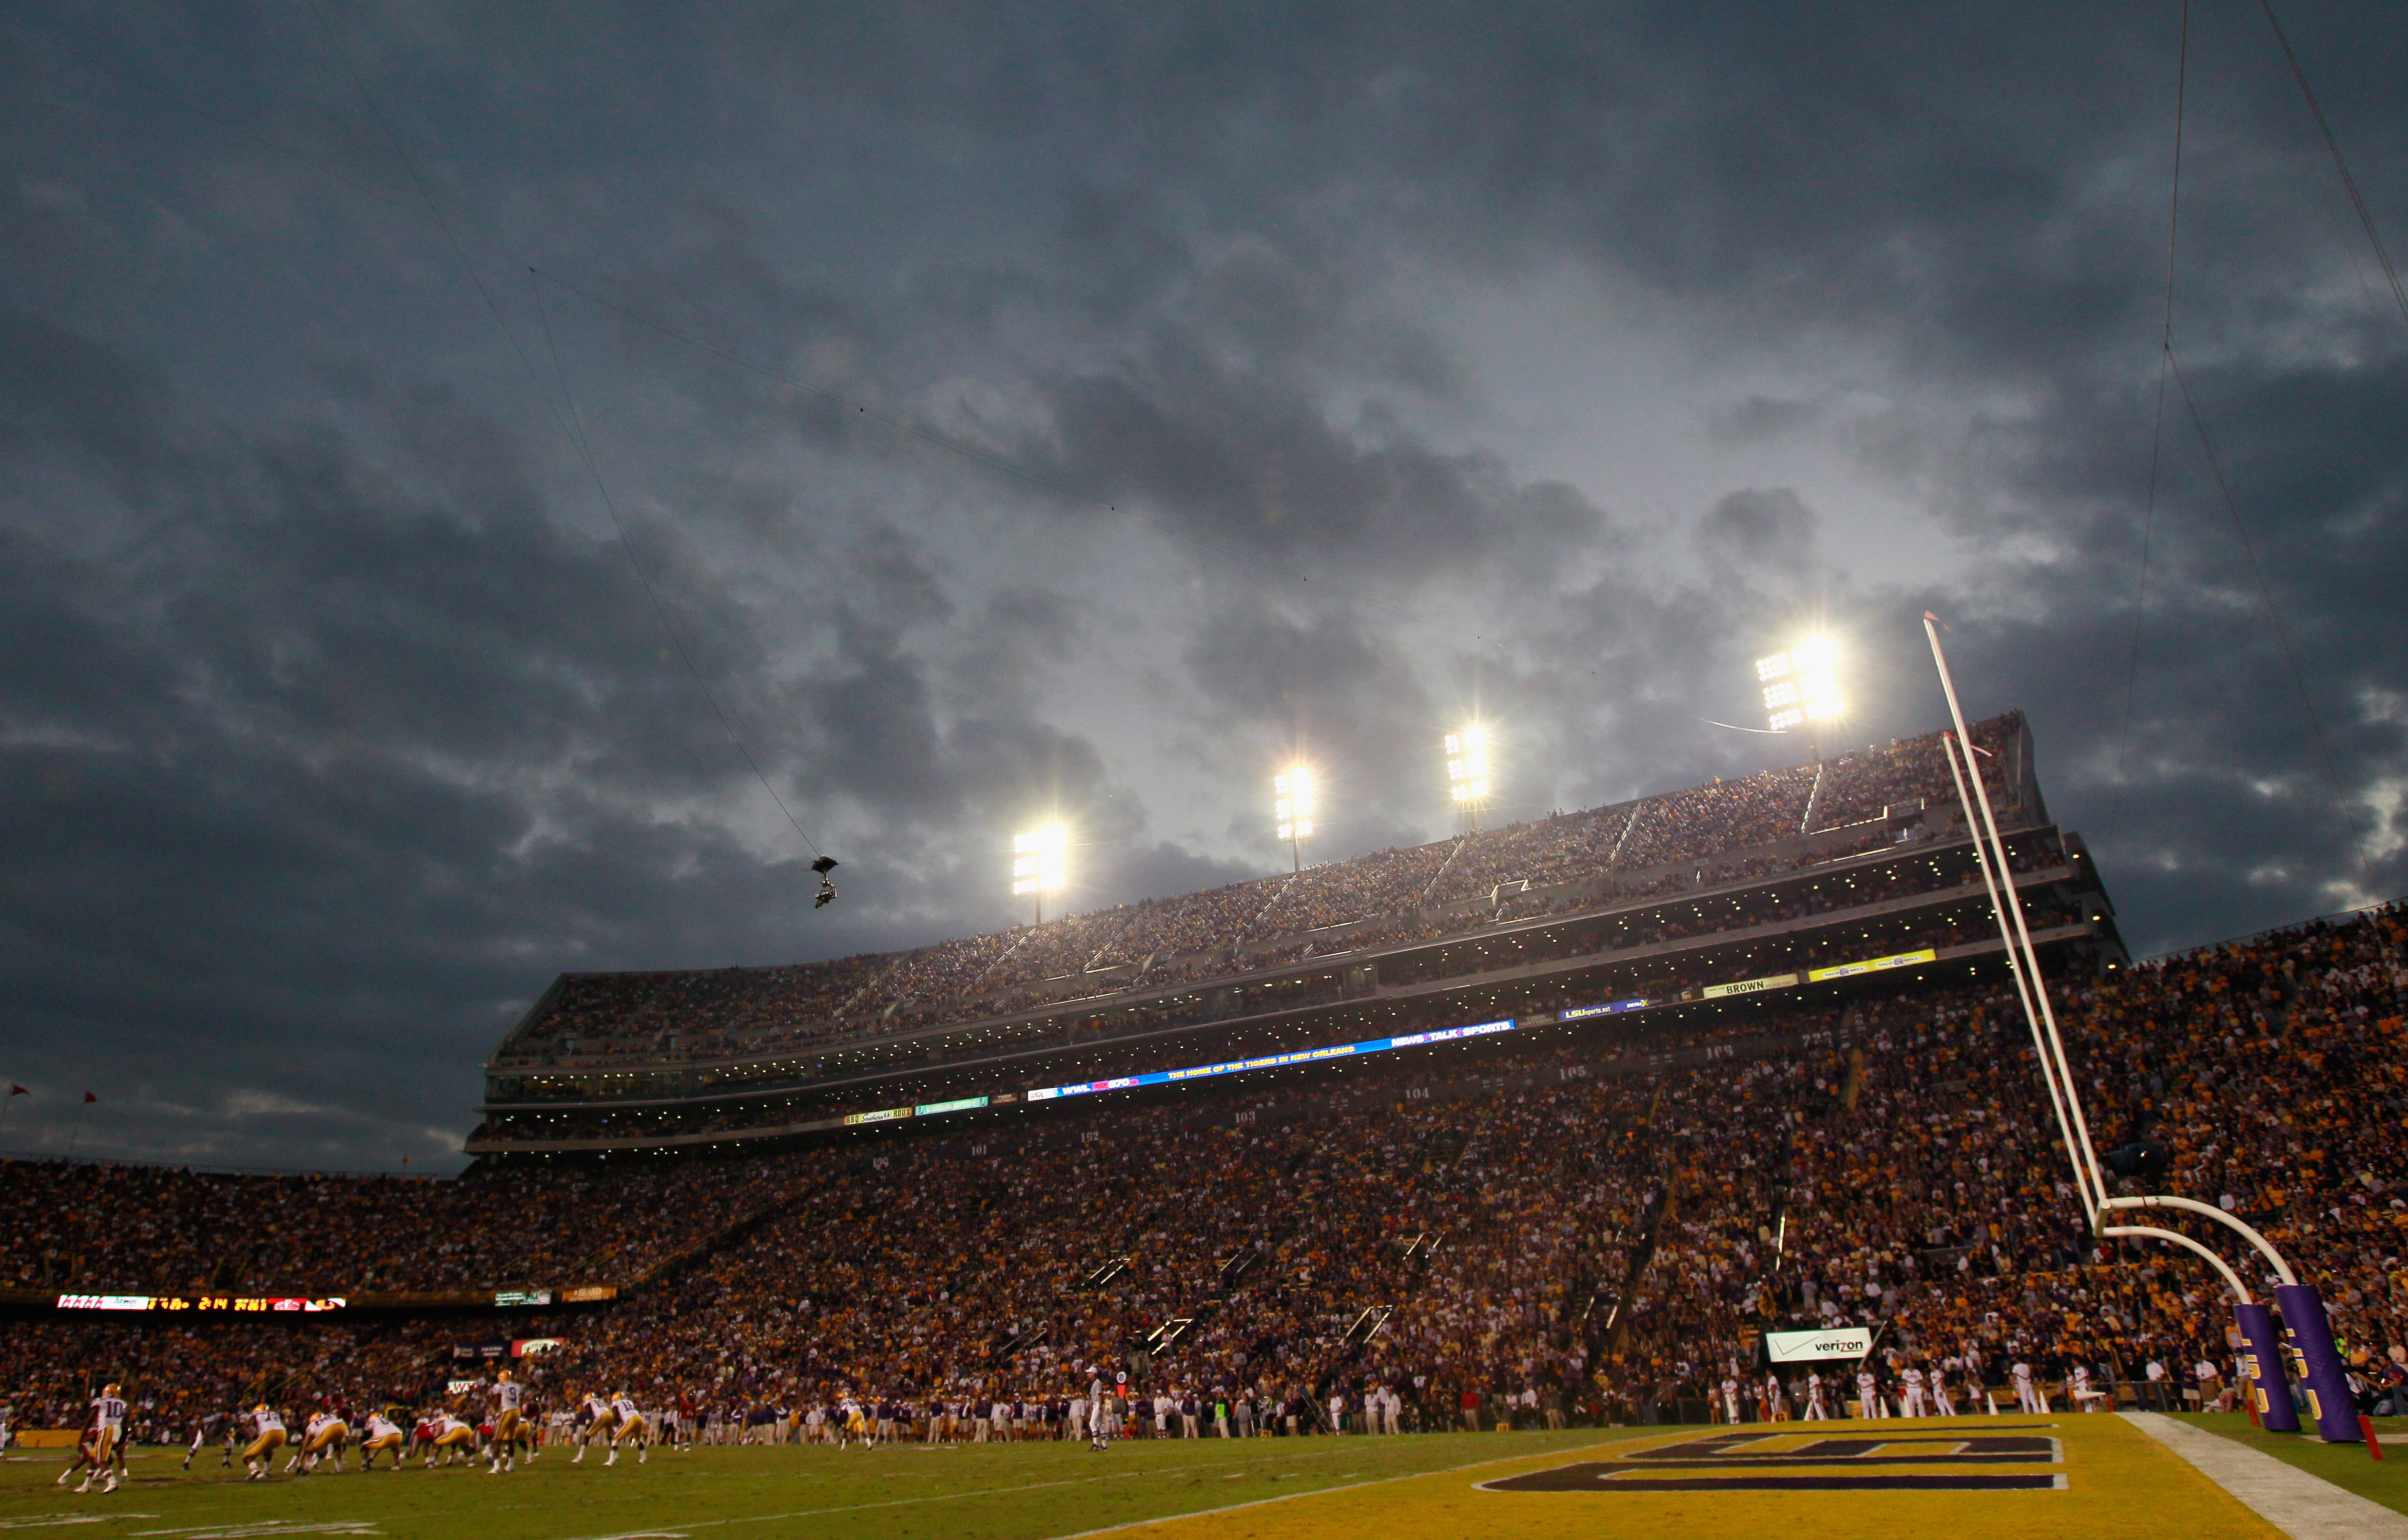 BATON ROUGE, LA - NOVEMBER 20:  A general view of Tiger Stadium during the game betweem the Louisiana State University Tigers and the Ole Miss Rebels on November 20, 2010 in Baton Rouge, Louisiana.  (Photo by Kevin C. Cox/Getty Images)